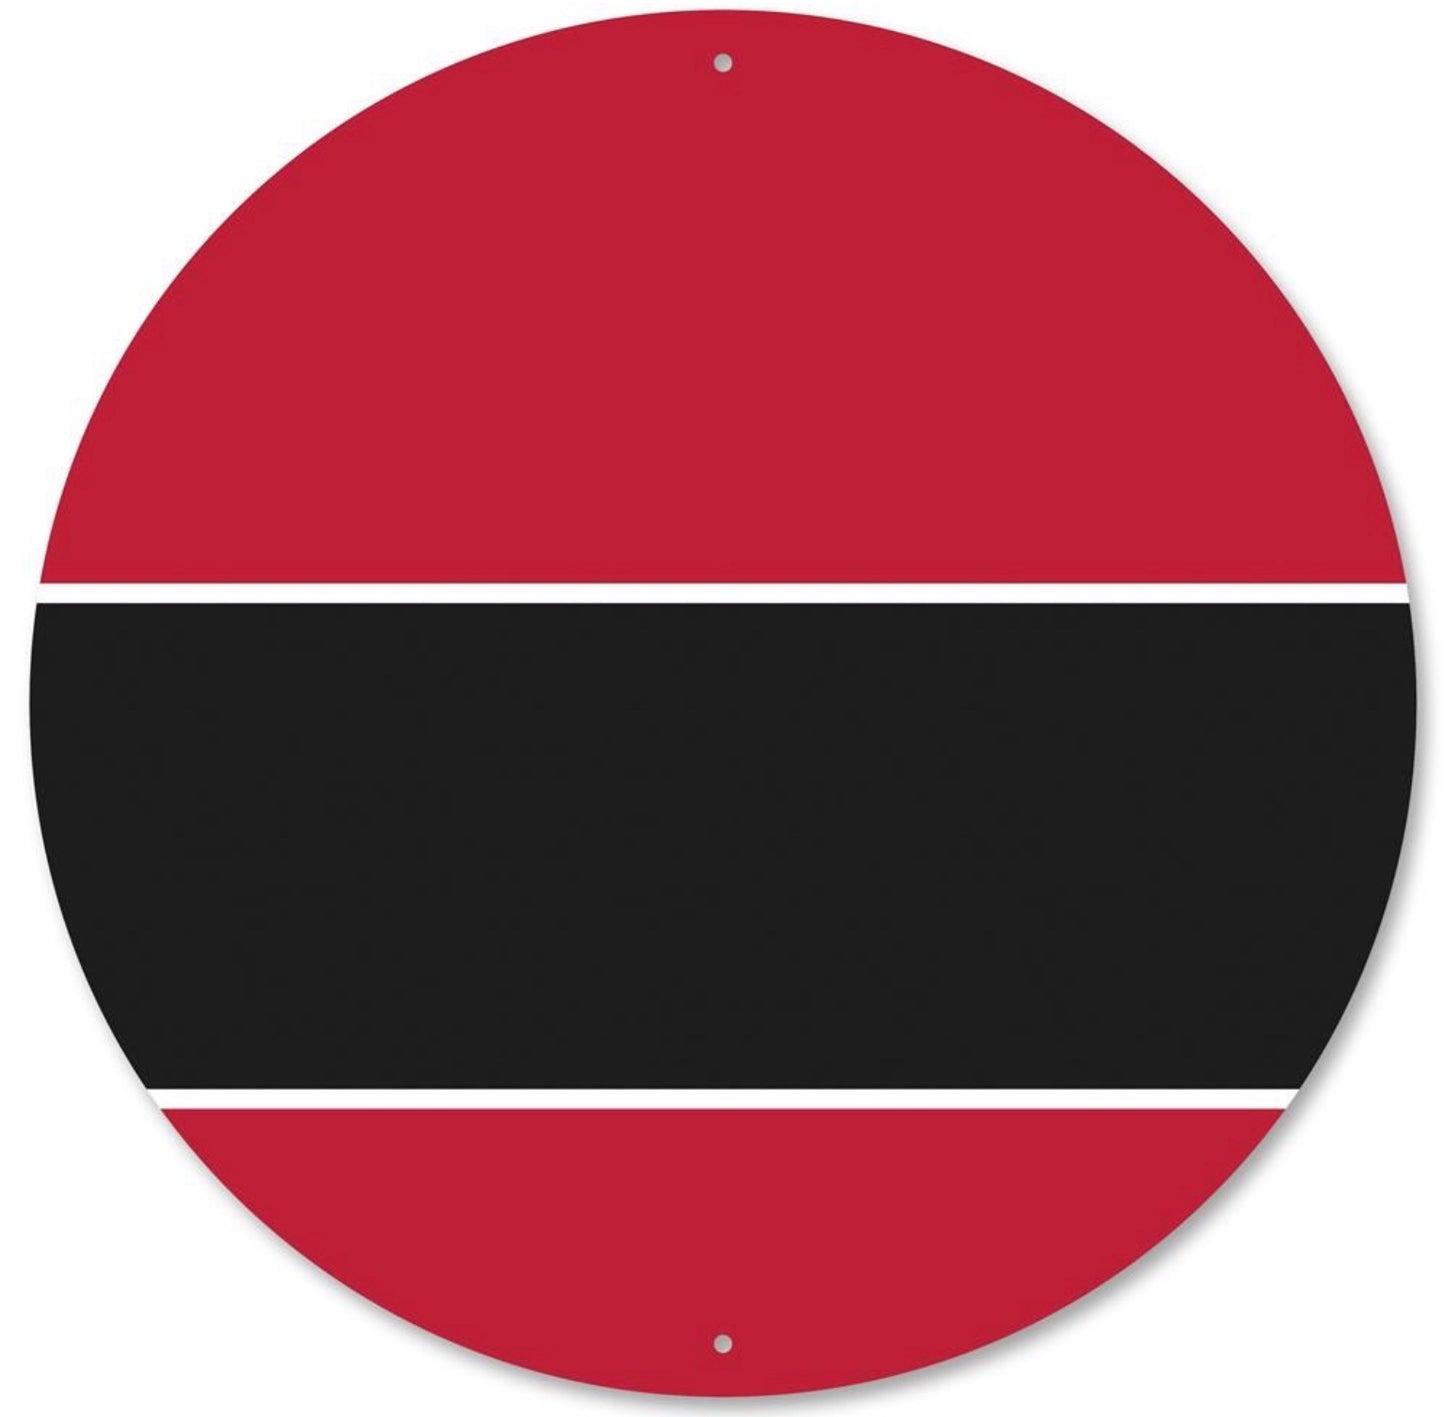 12” Round Metal Red, Black, and White Blank Wreath Sign